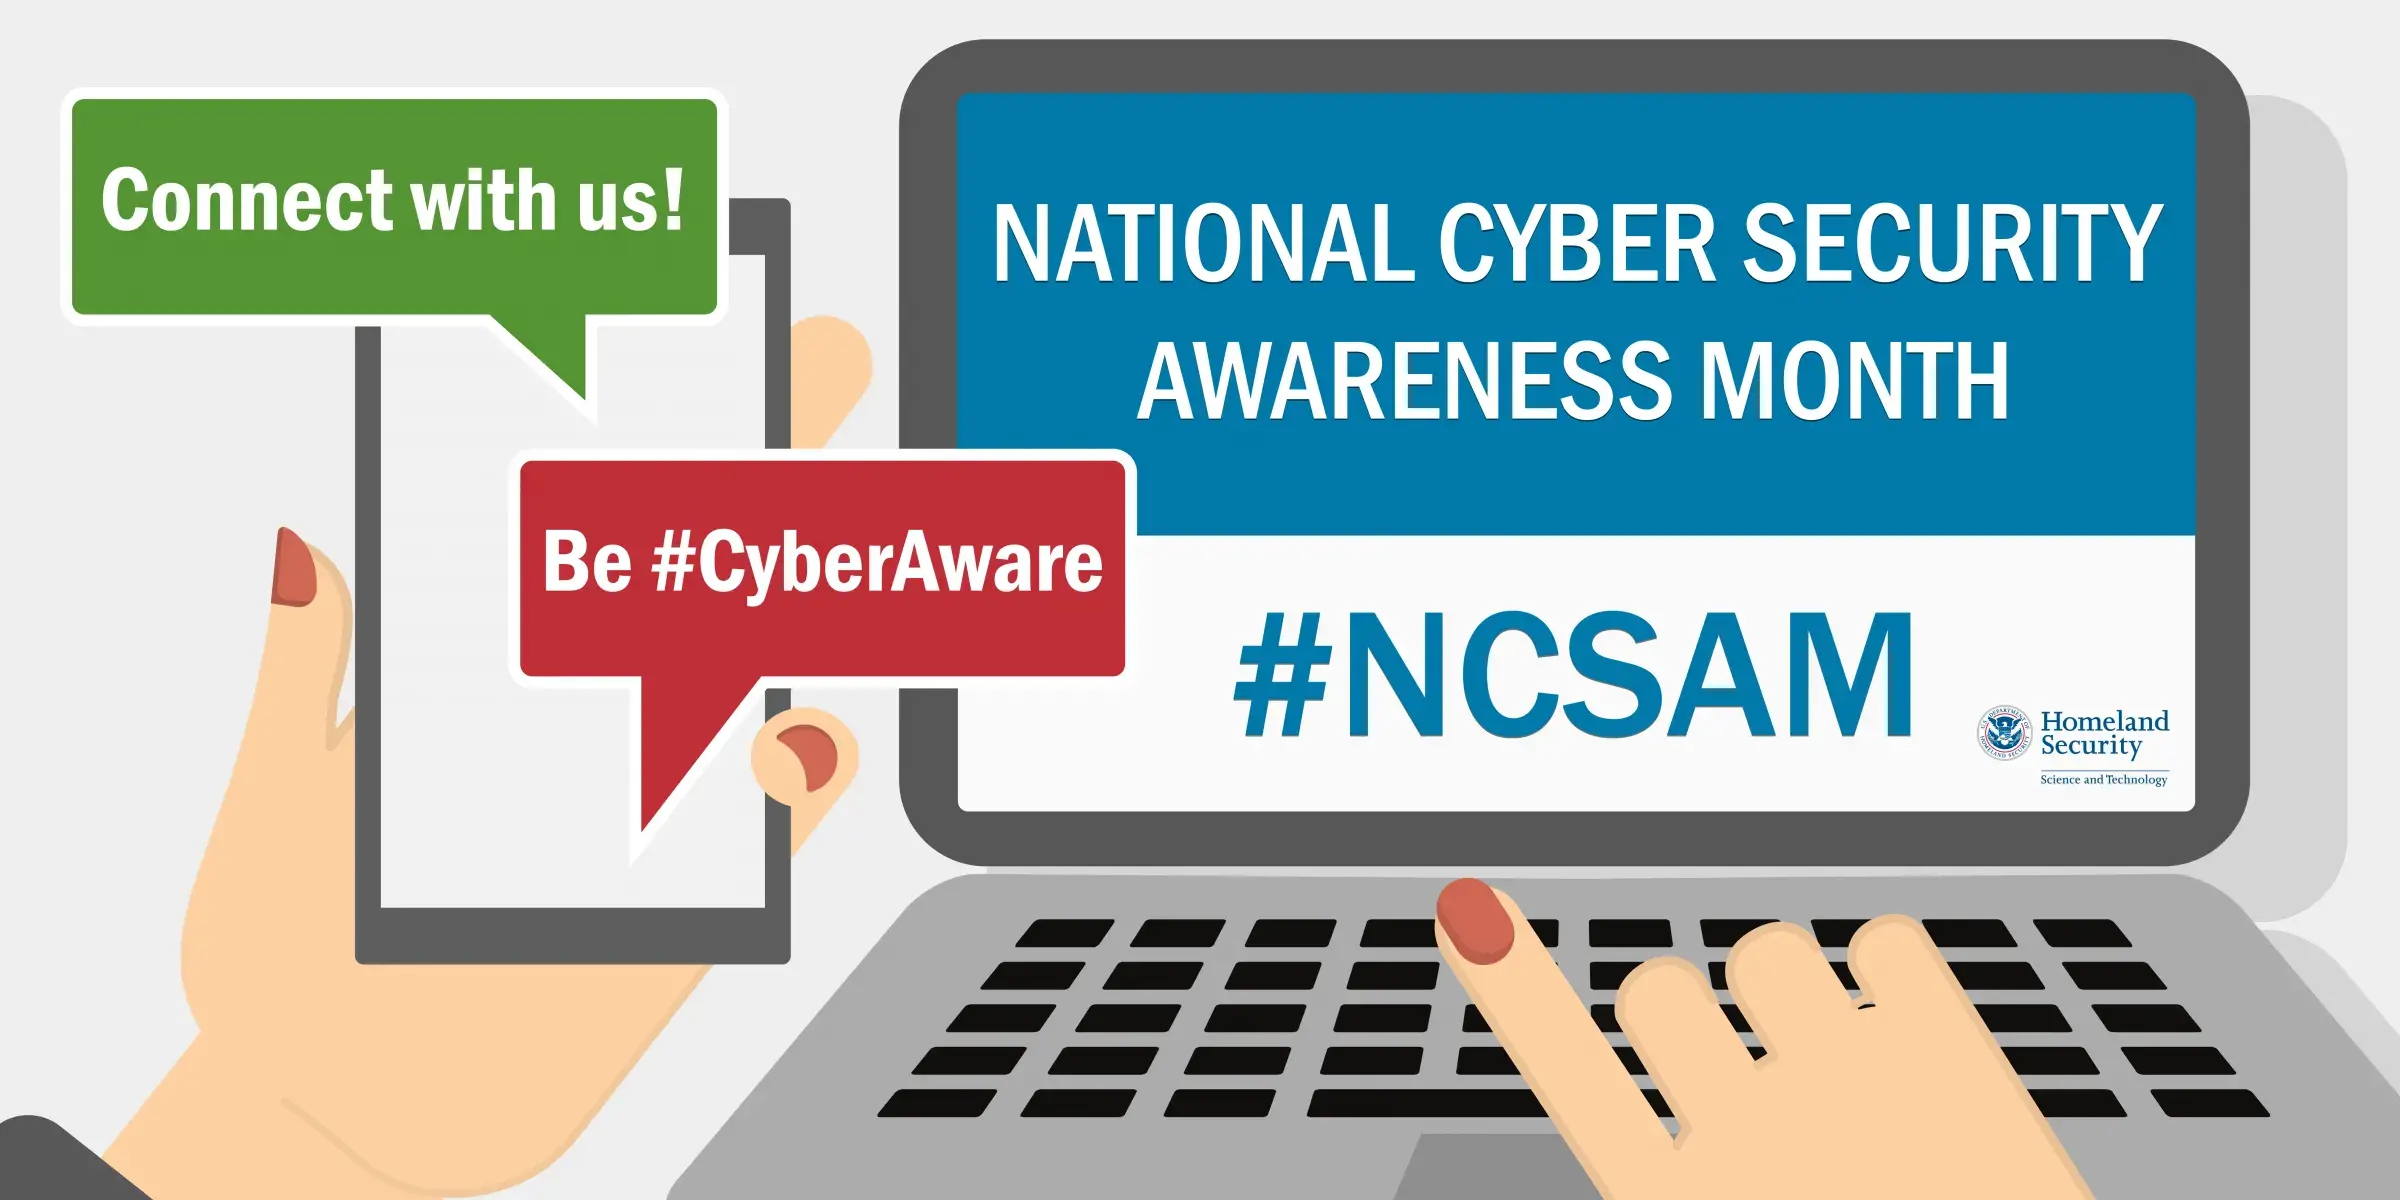 Connect with us! Be #CyberAware. National Cyber Security Awareness Month #NCSAM DHS S&T Logo